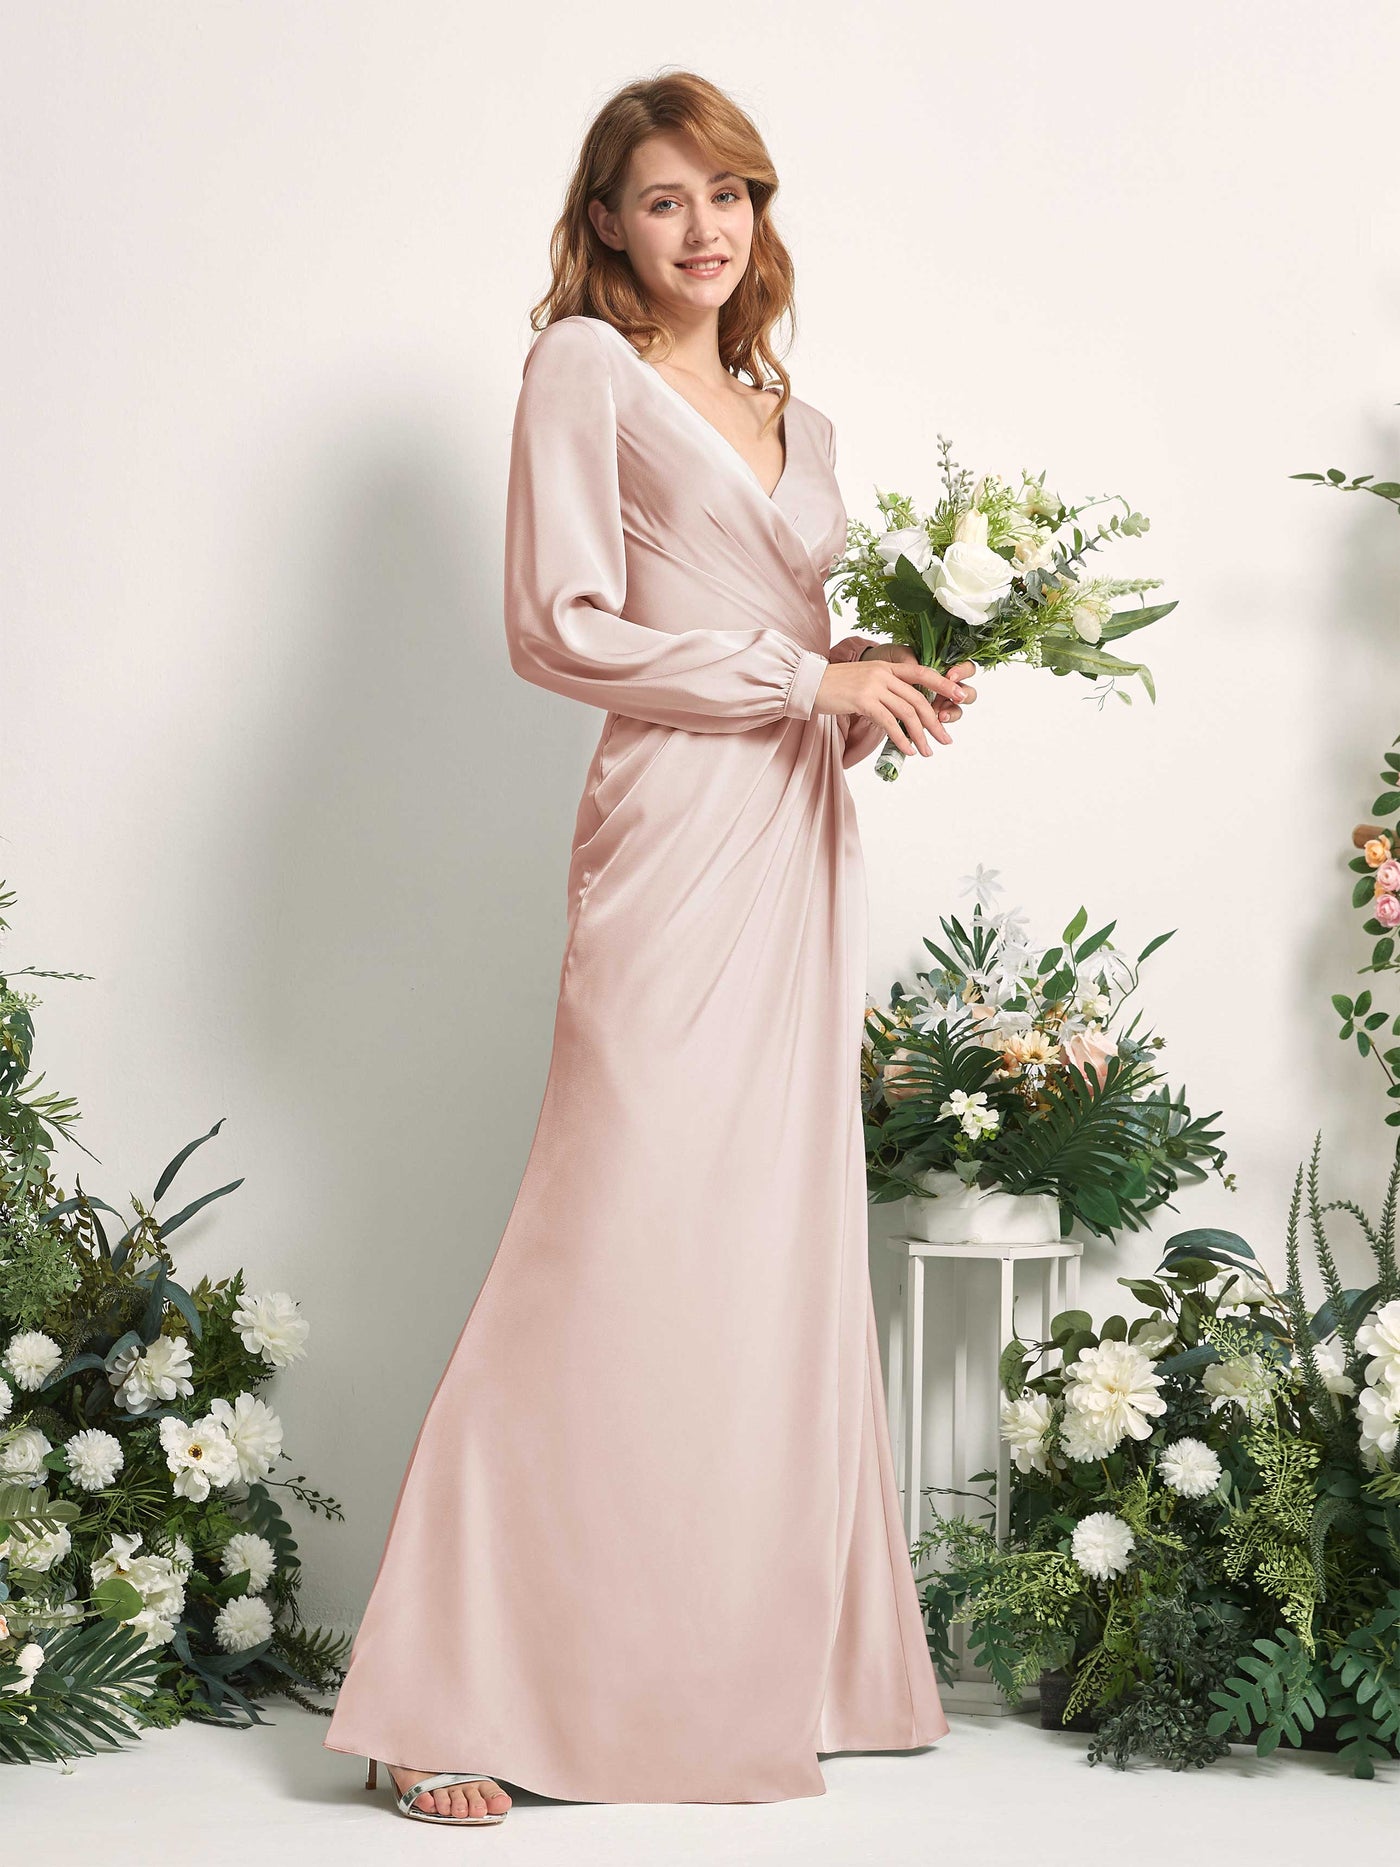 Pearl Pink Bridesmaid Dresses Bridesmaid Dress Ball Gown Satin V-neck Full Length Long Sleeves Wedding Party Dress (80225110)#color_pearl-pink